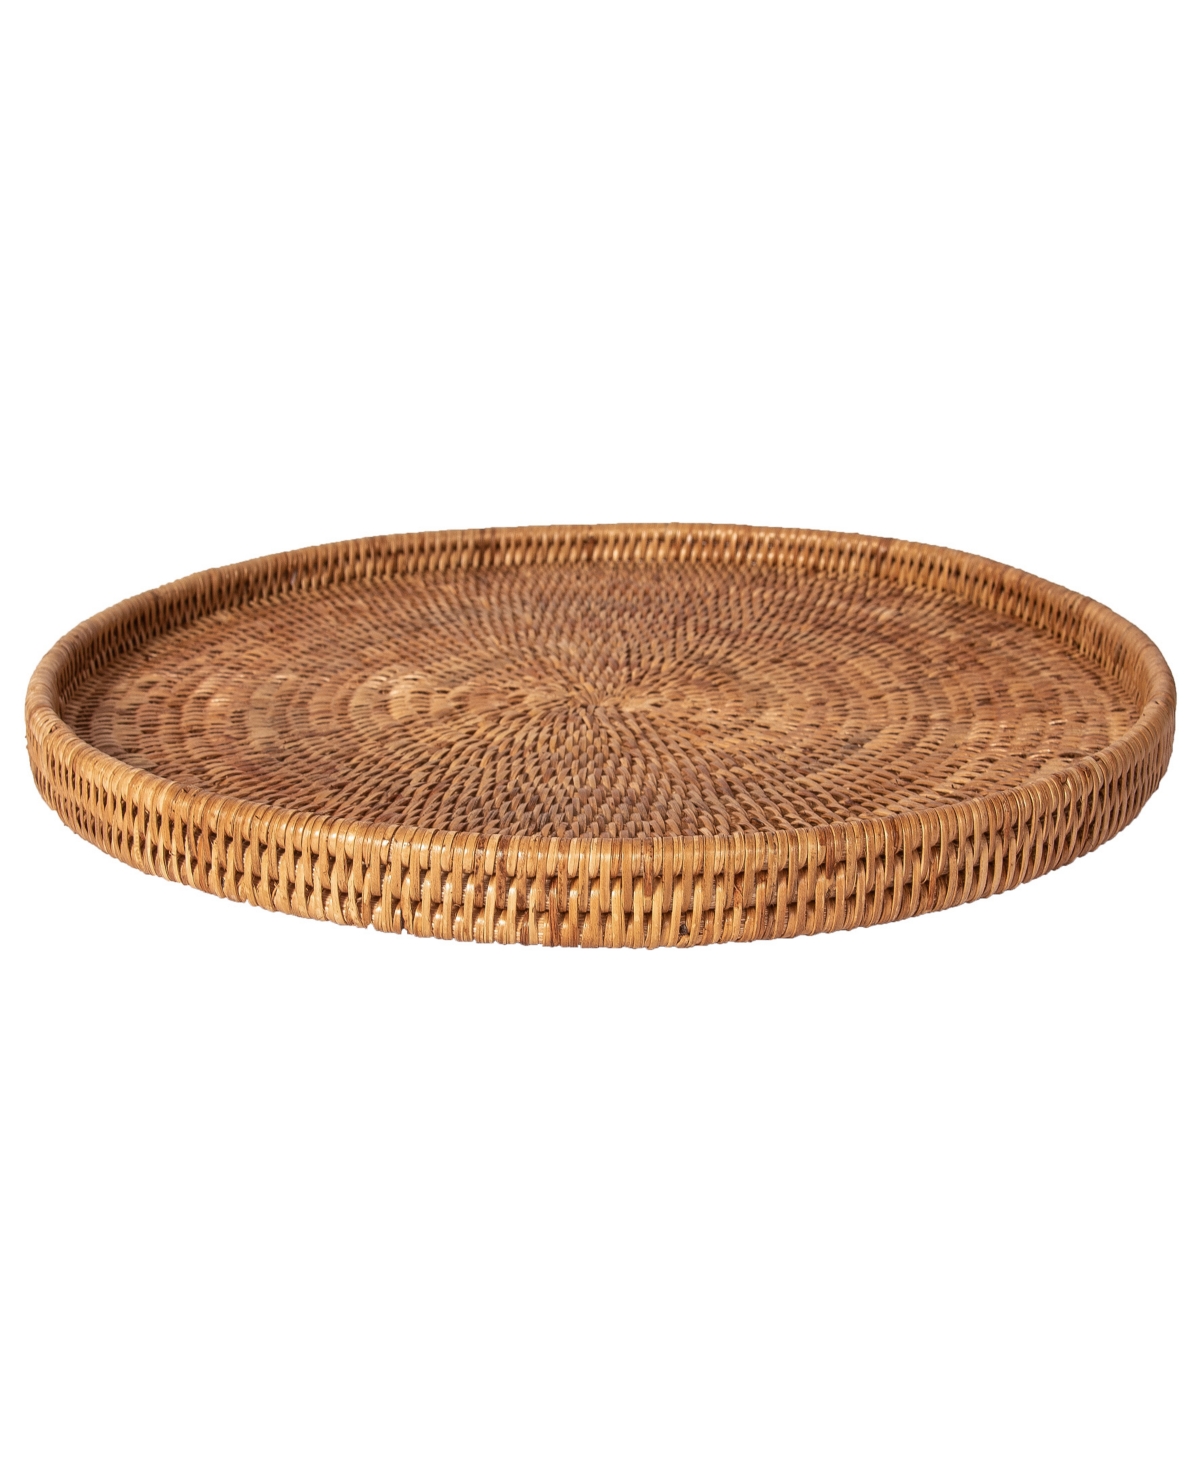 Artifacts Trading Company Artifacts Rattan Round Flat Tray In Honey Brown